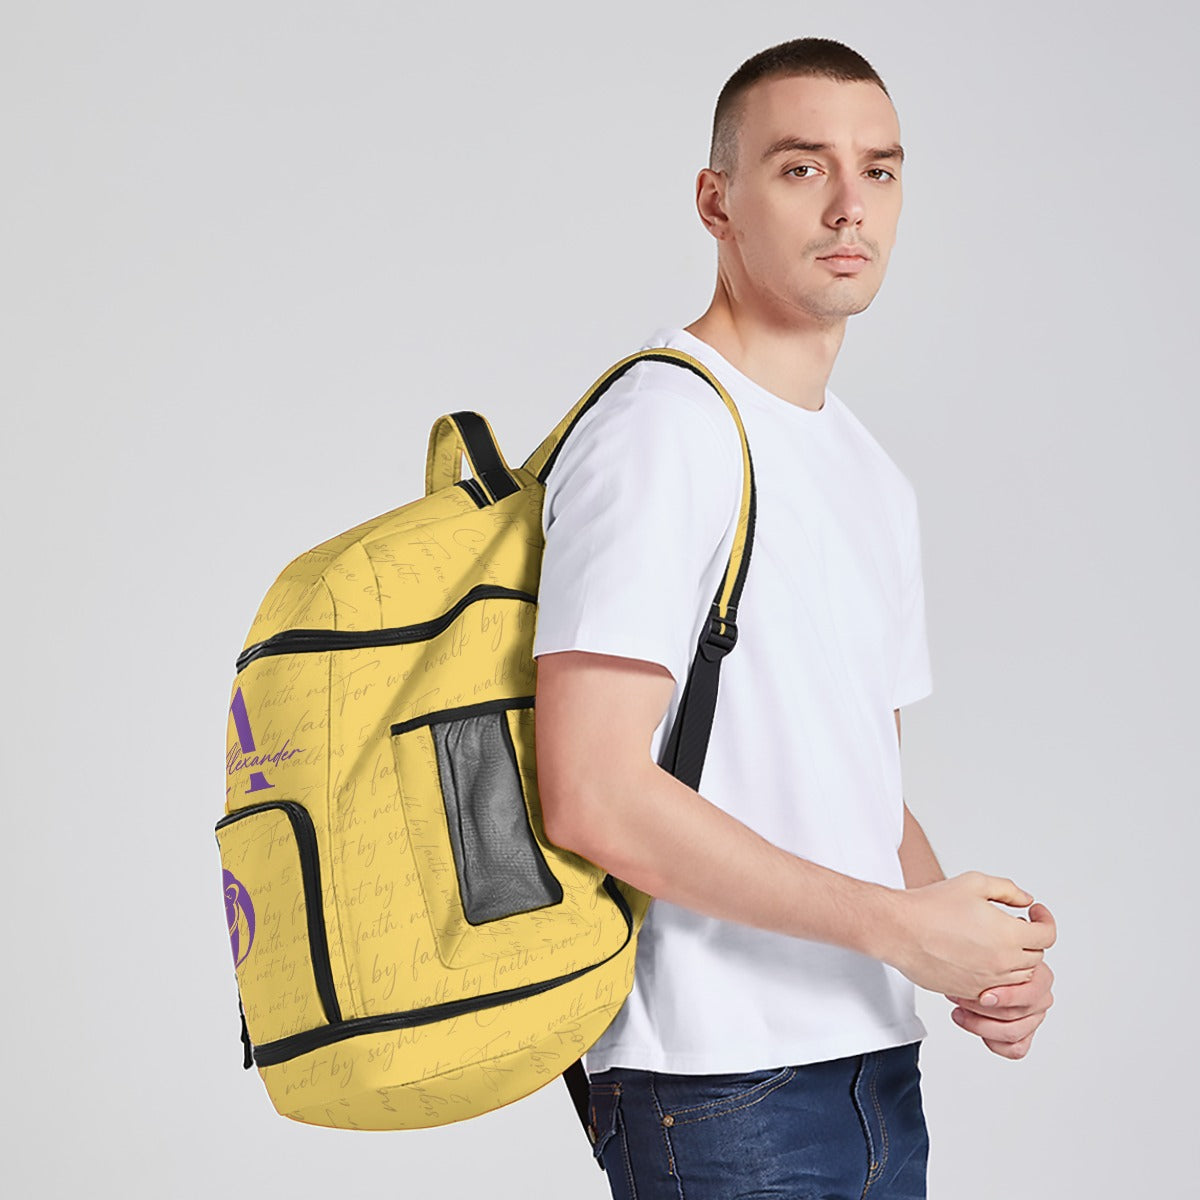 Christian Sports and Travel Backpack